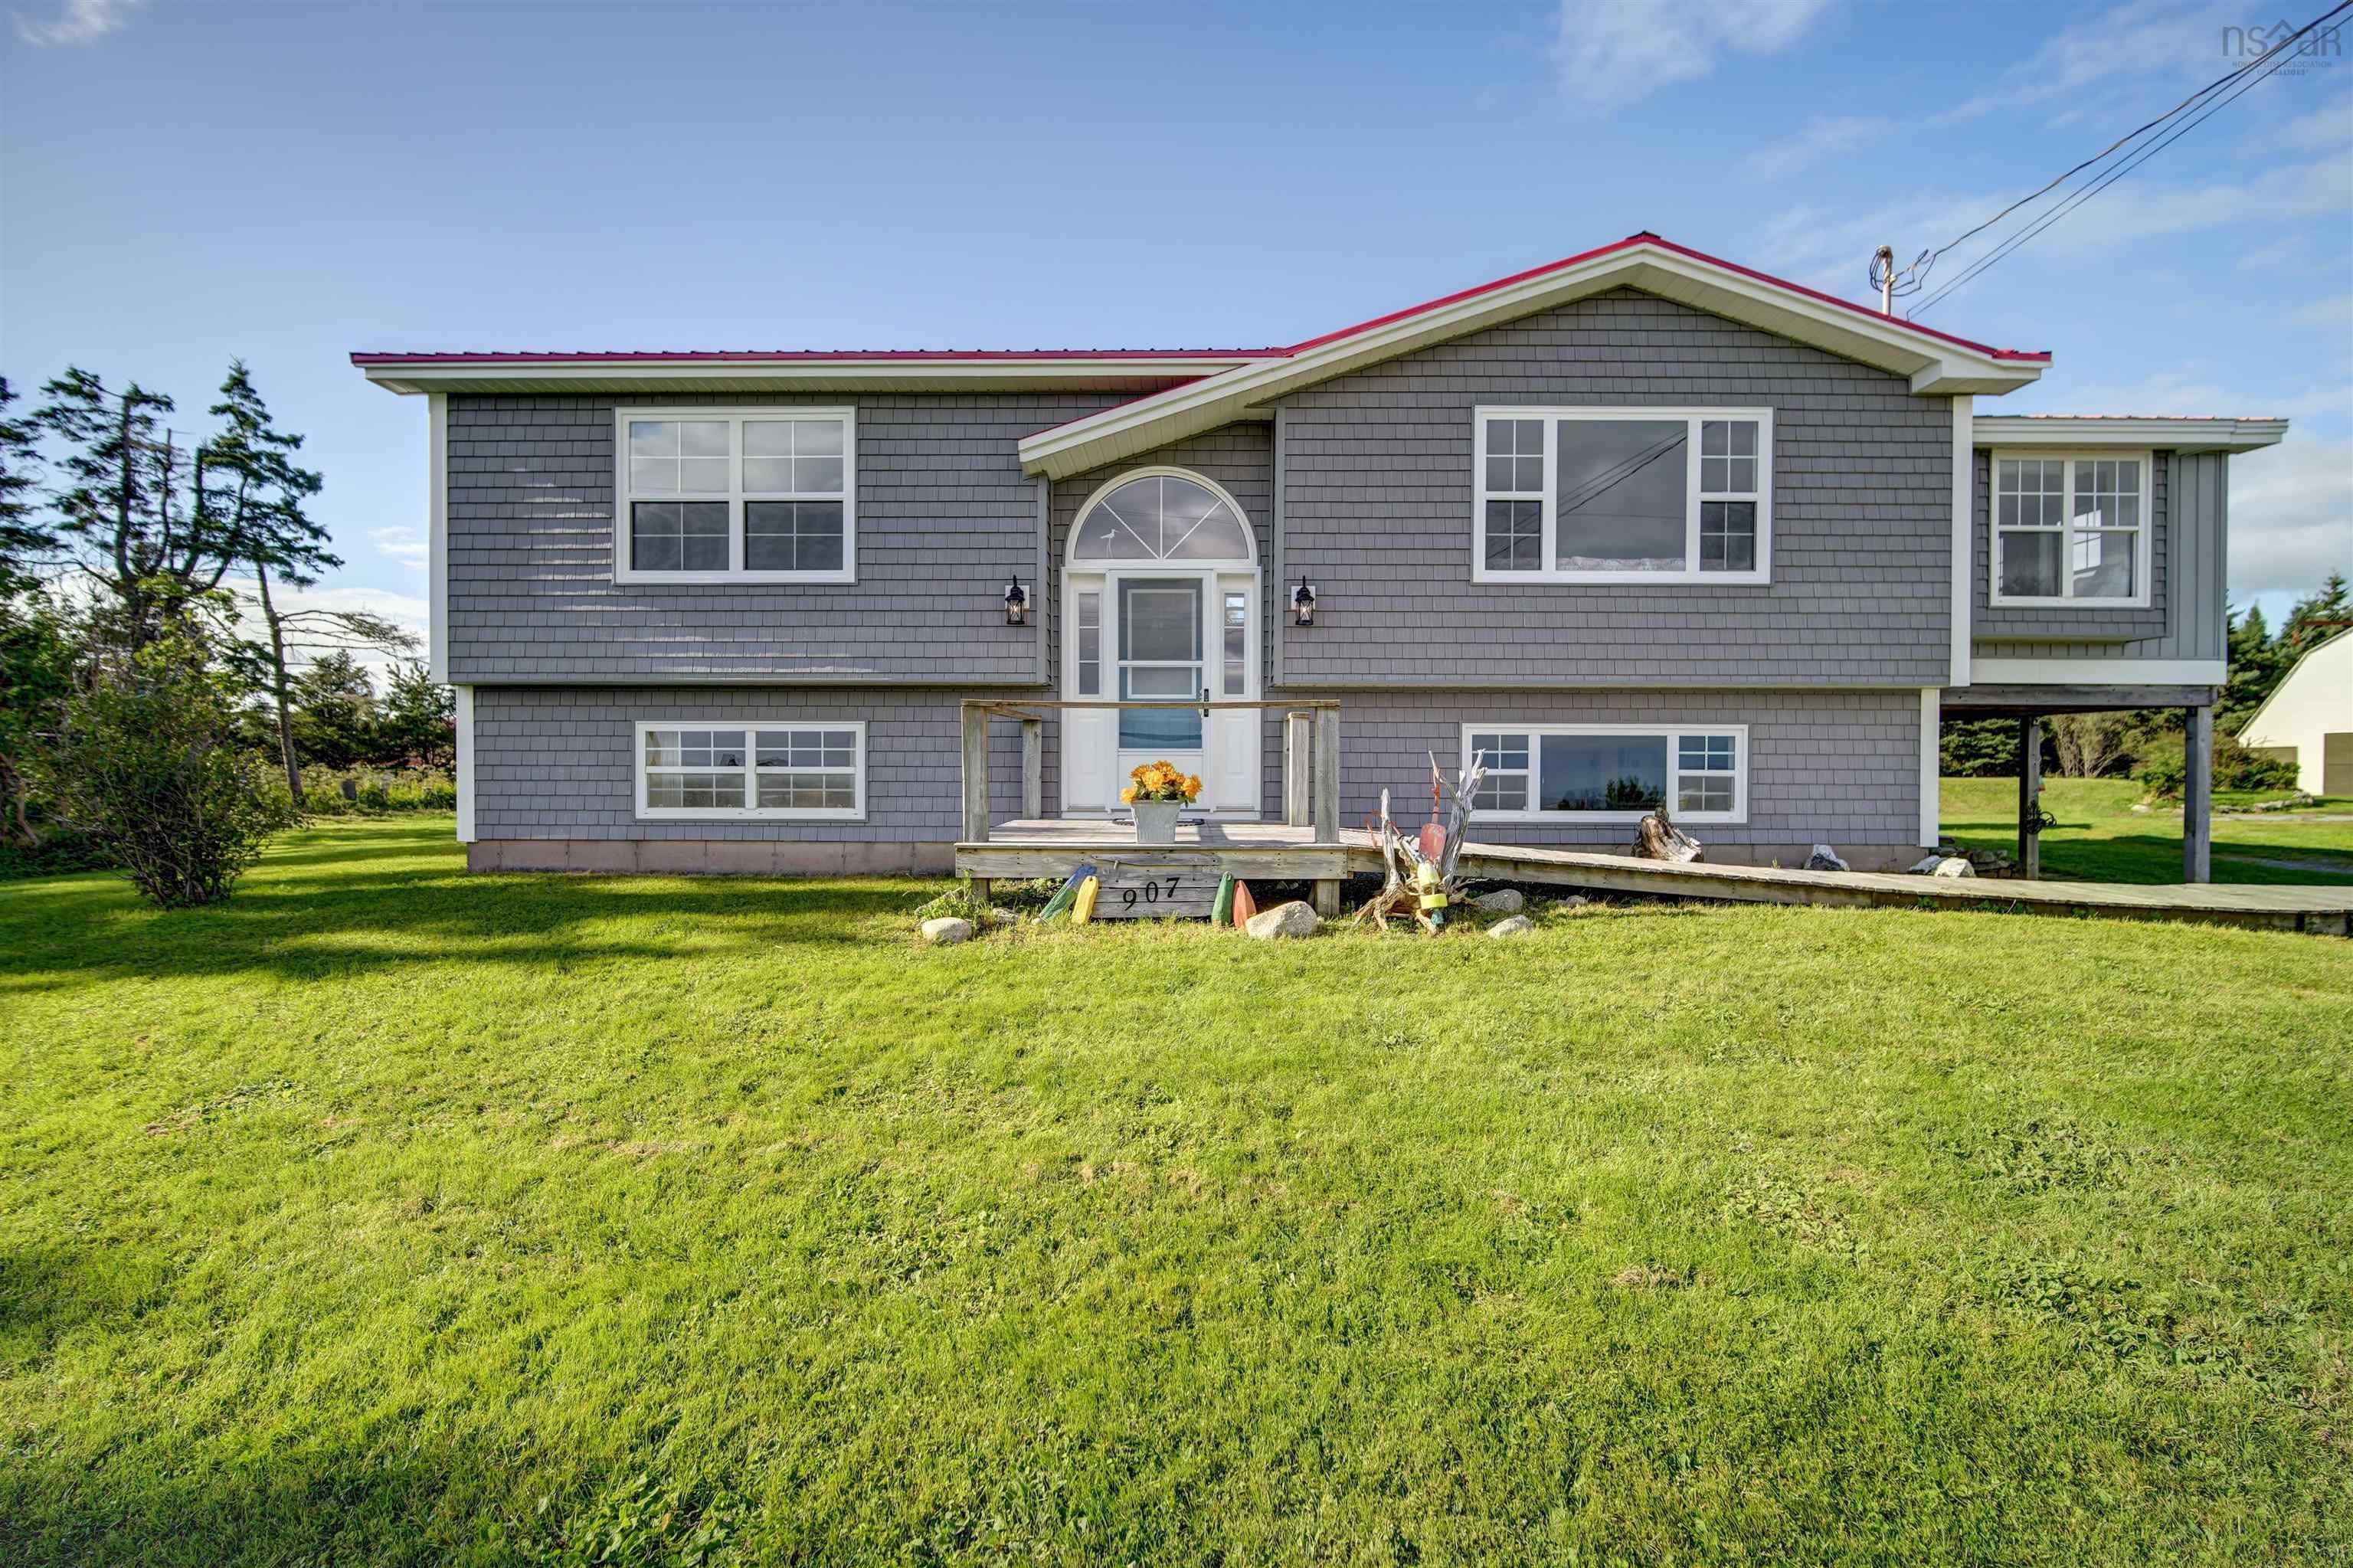 Main Photo: 907 West Lawrencetown Road in Lawrencetown: 31-Lawrencetown, Lake Echo, Port Residential for sale (Halifax-Dartmouth)  : MLS®# 202318970